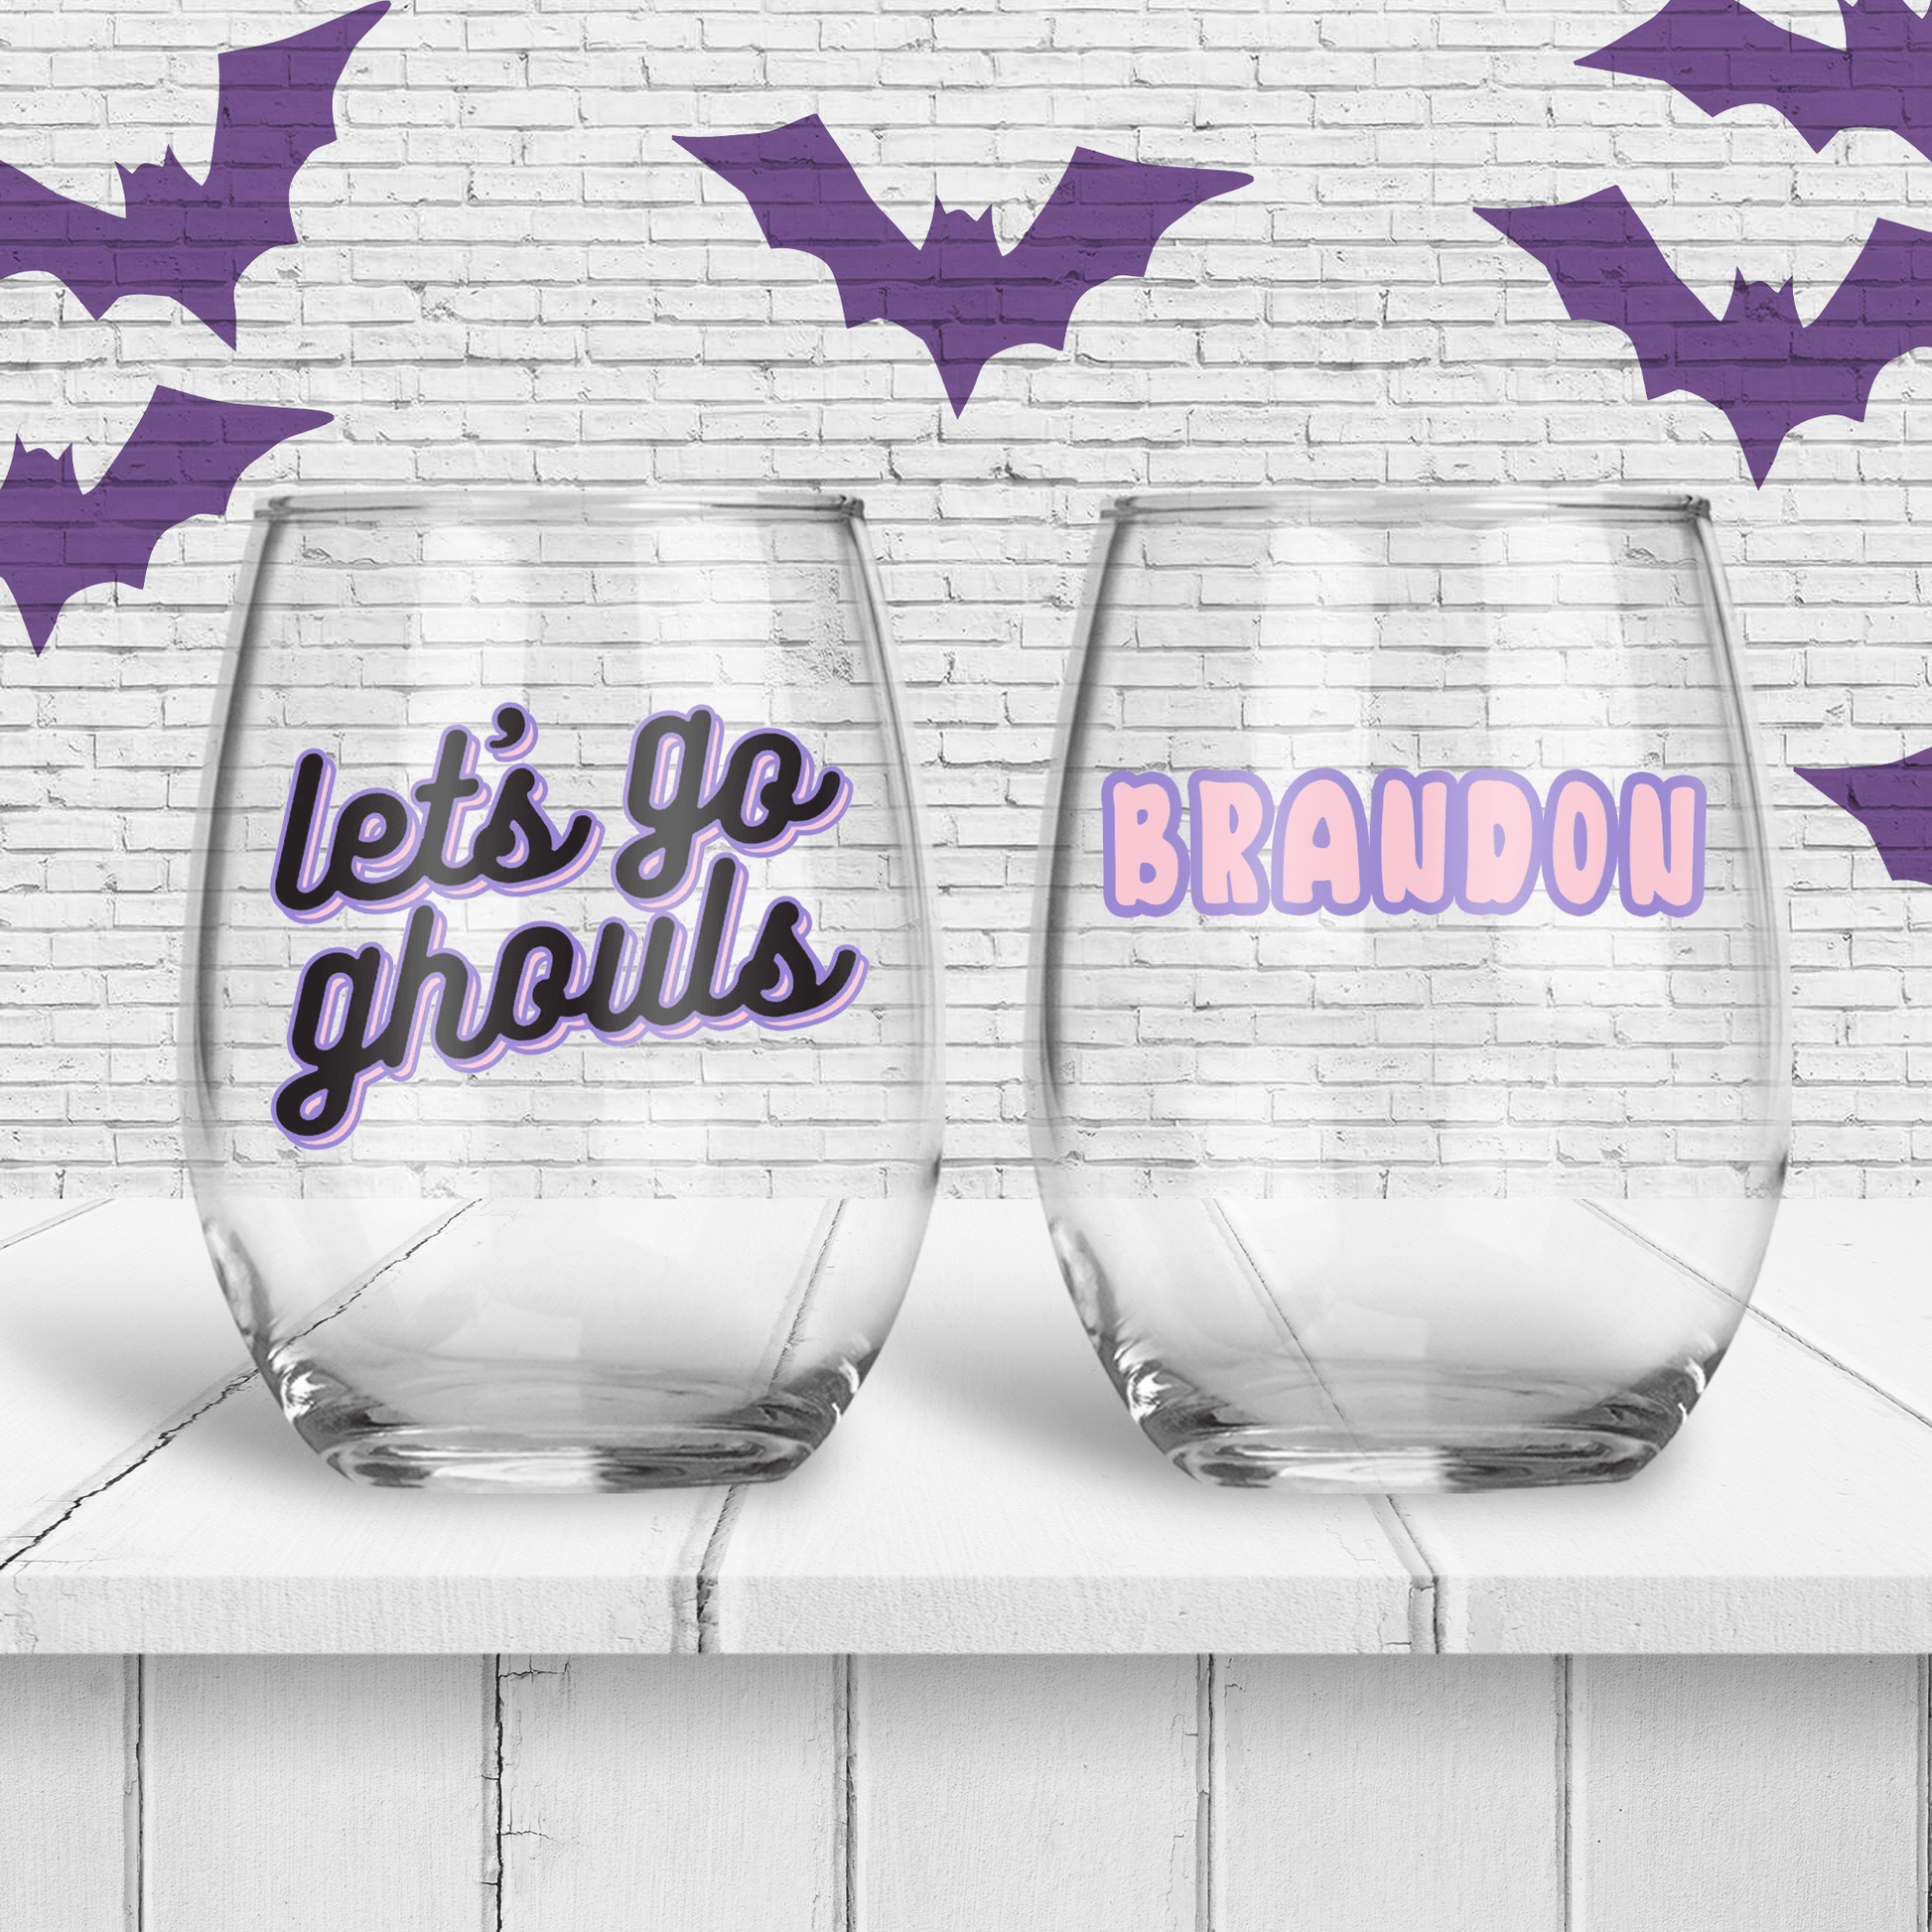 Let's Go Ghouls Personalized Stemless Wine Glass - Two Crafty Gays